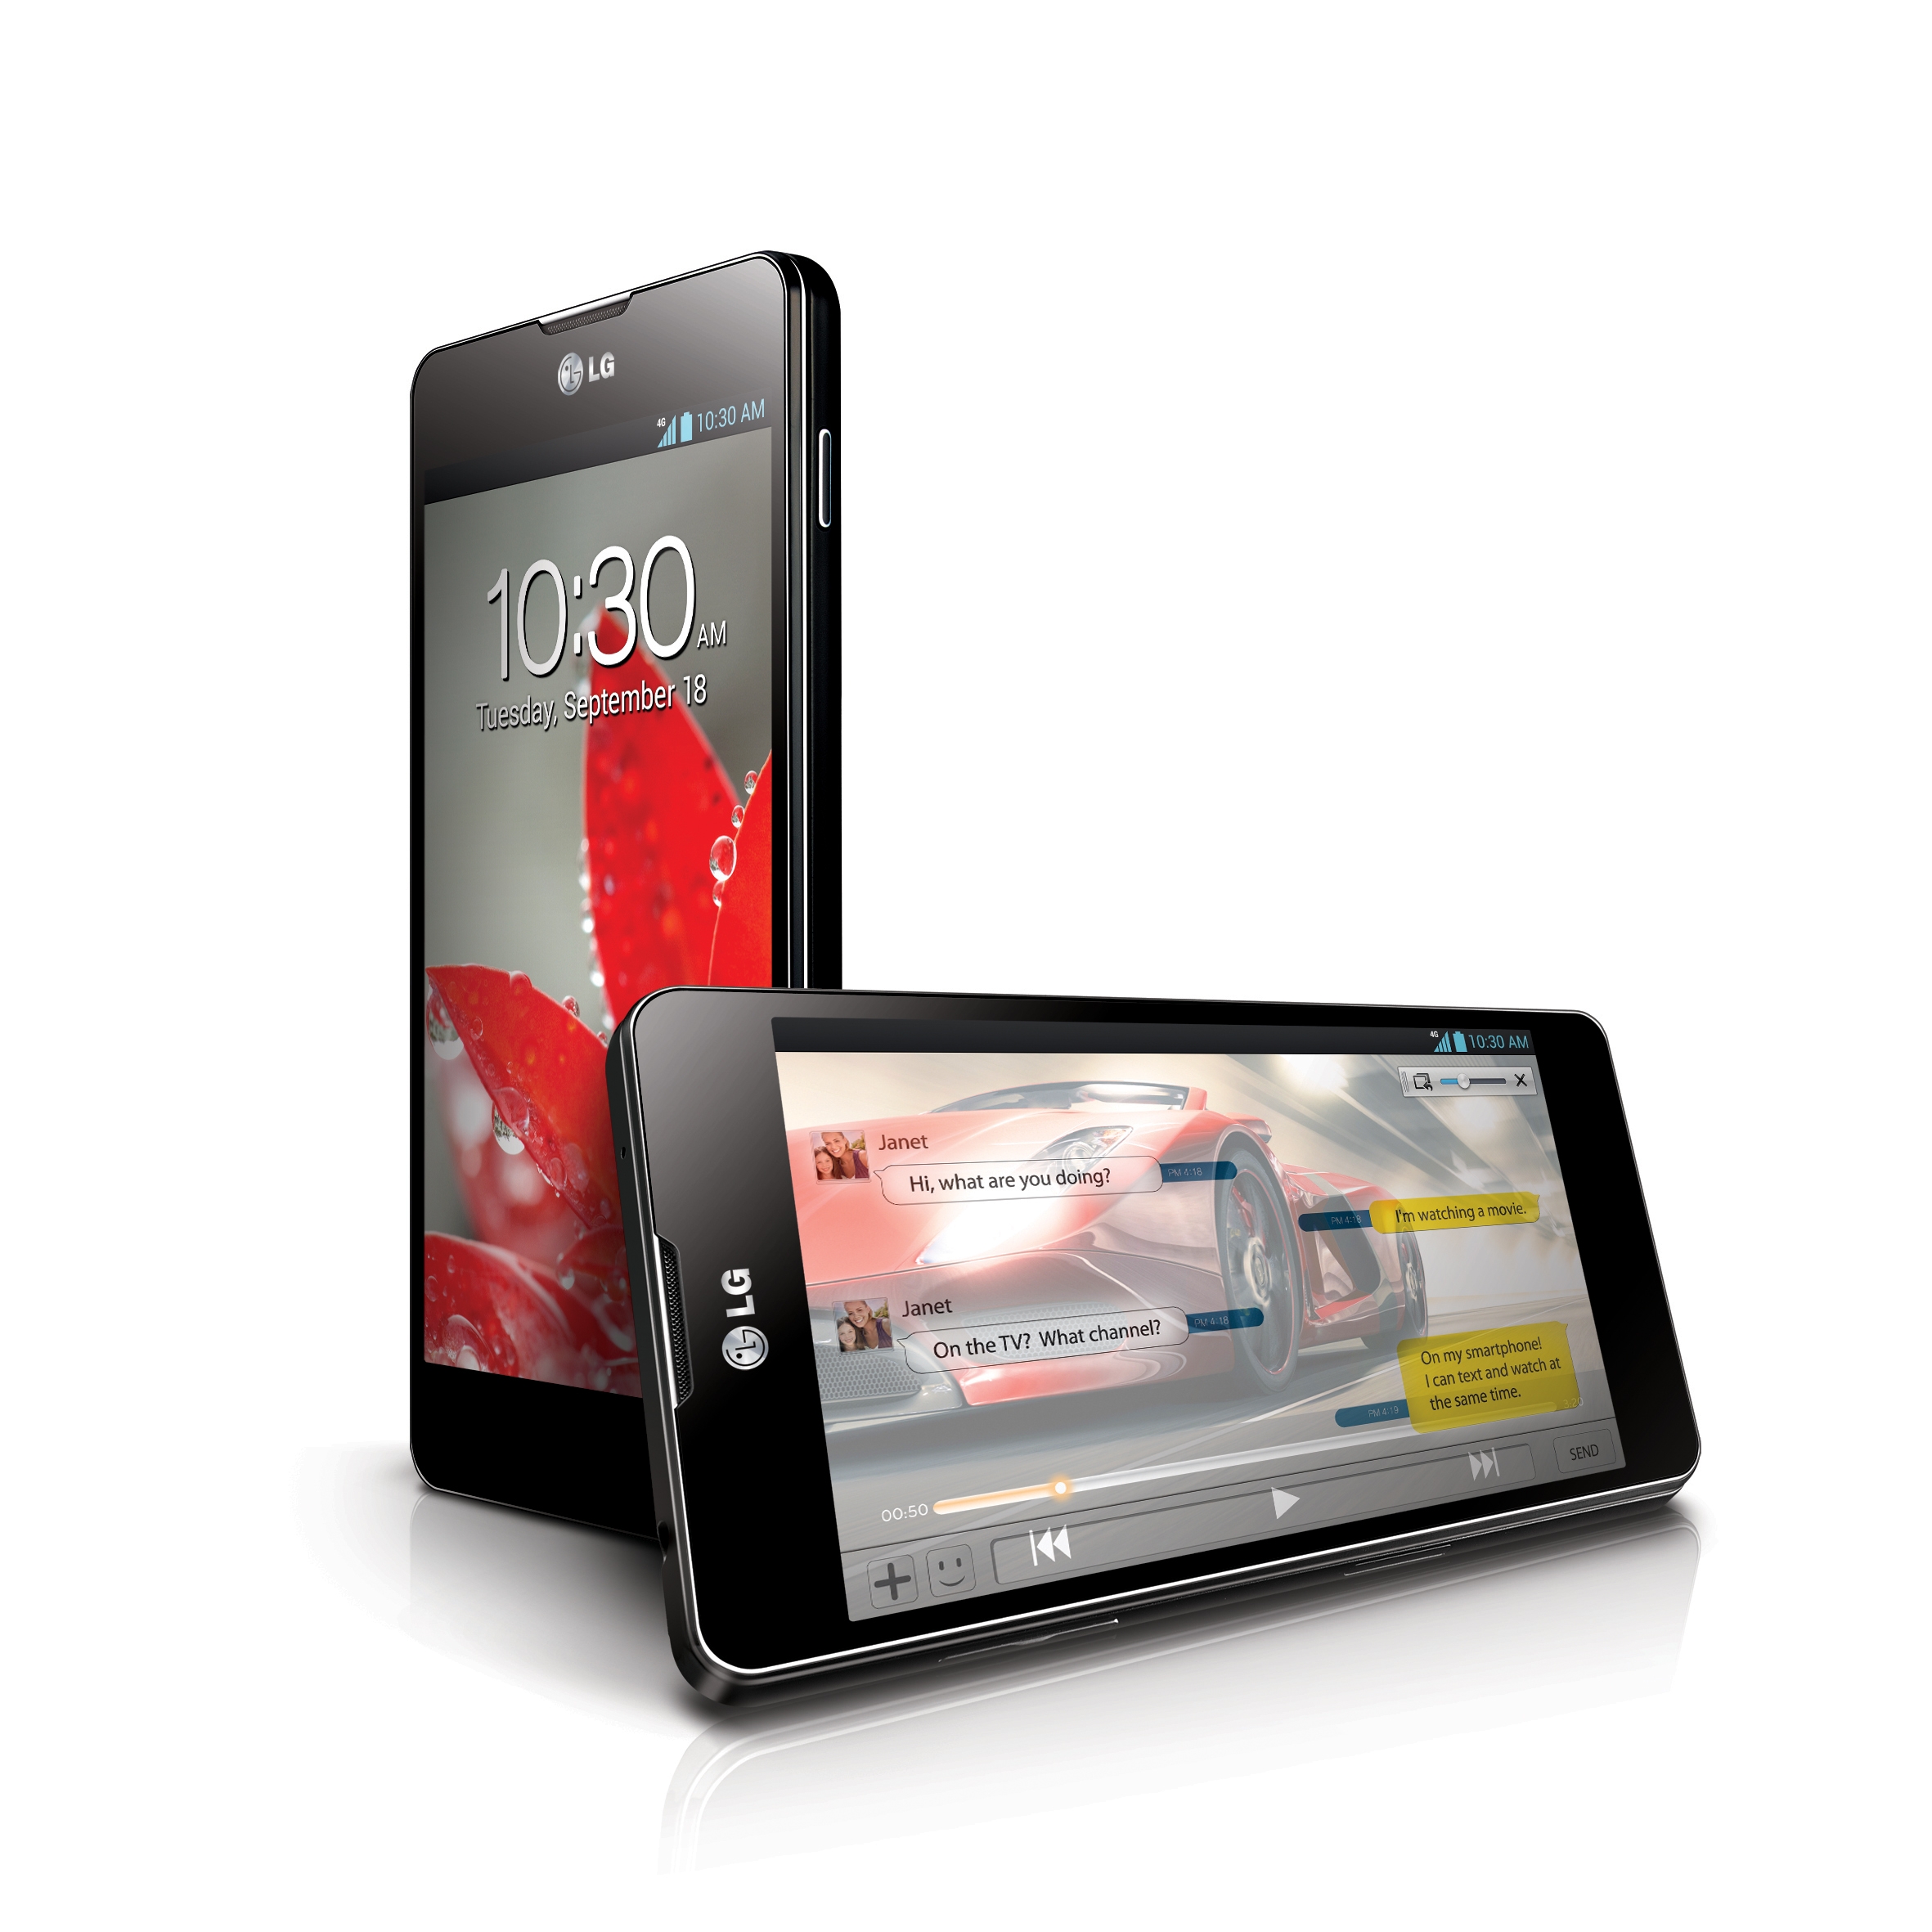 LG to change market dynamics with Optimus G  by focusing on differentiated user experience